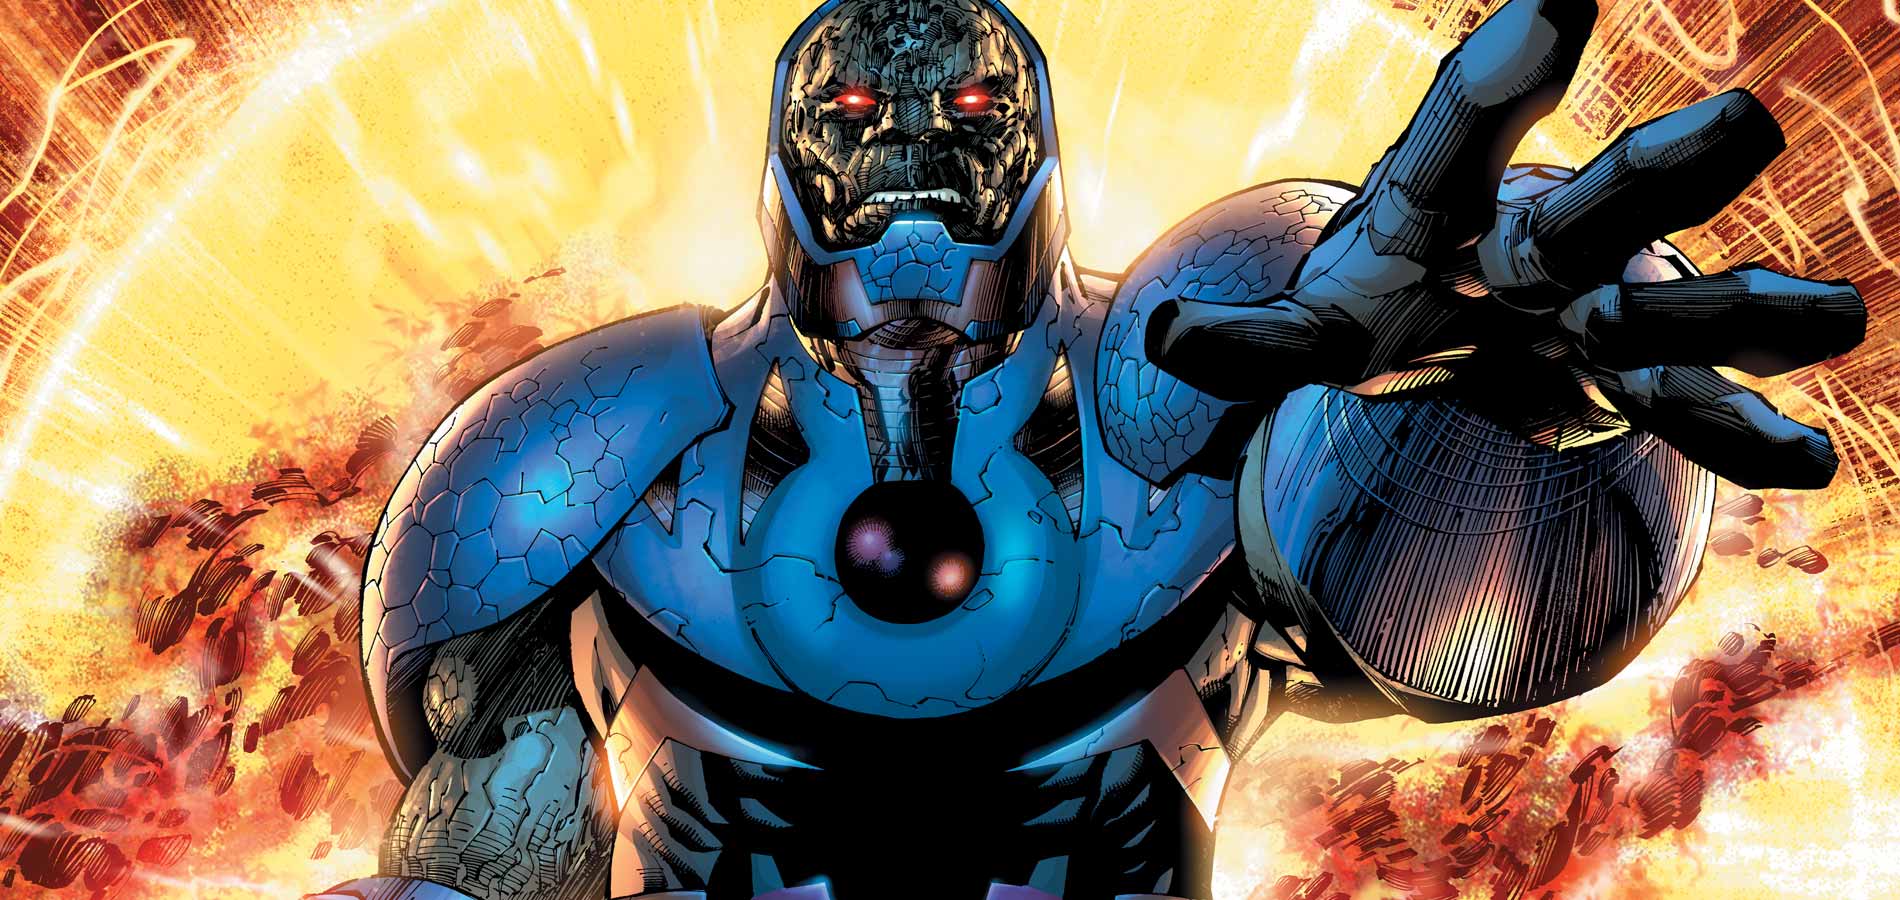 Who is the Justice League Movie Villain? 5 Reasons Darkseid is